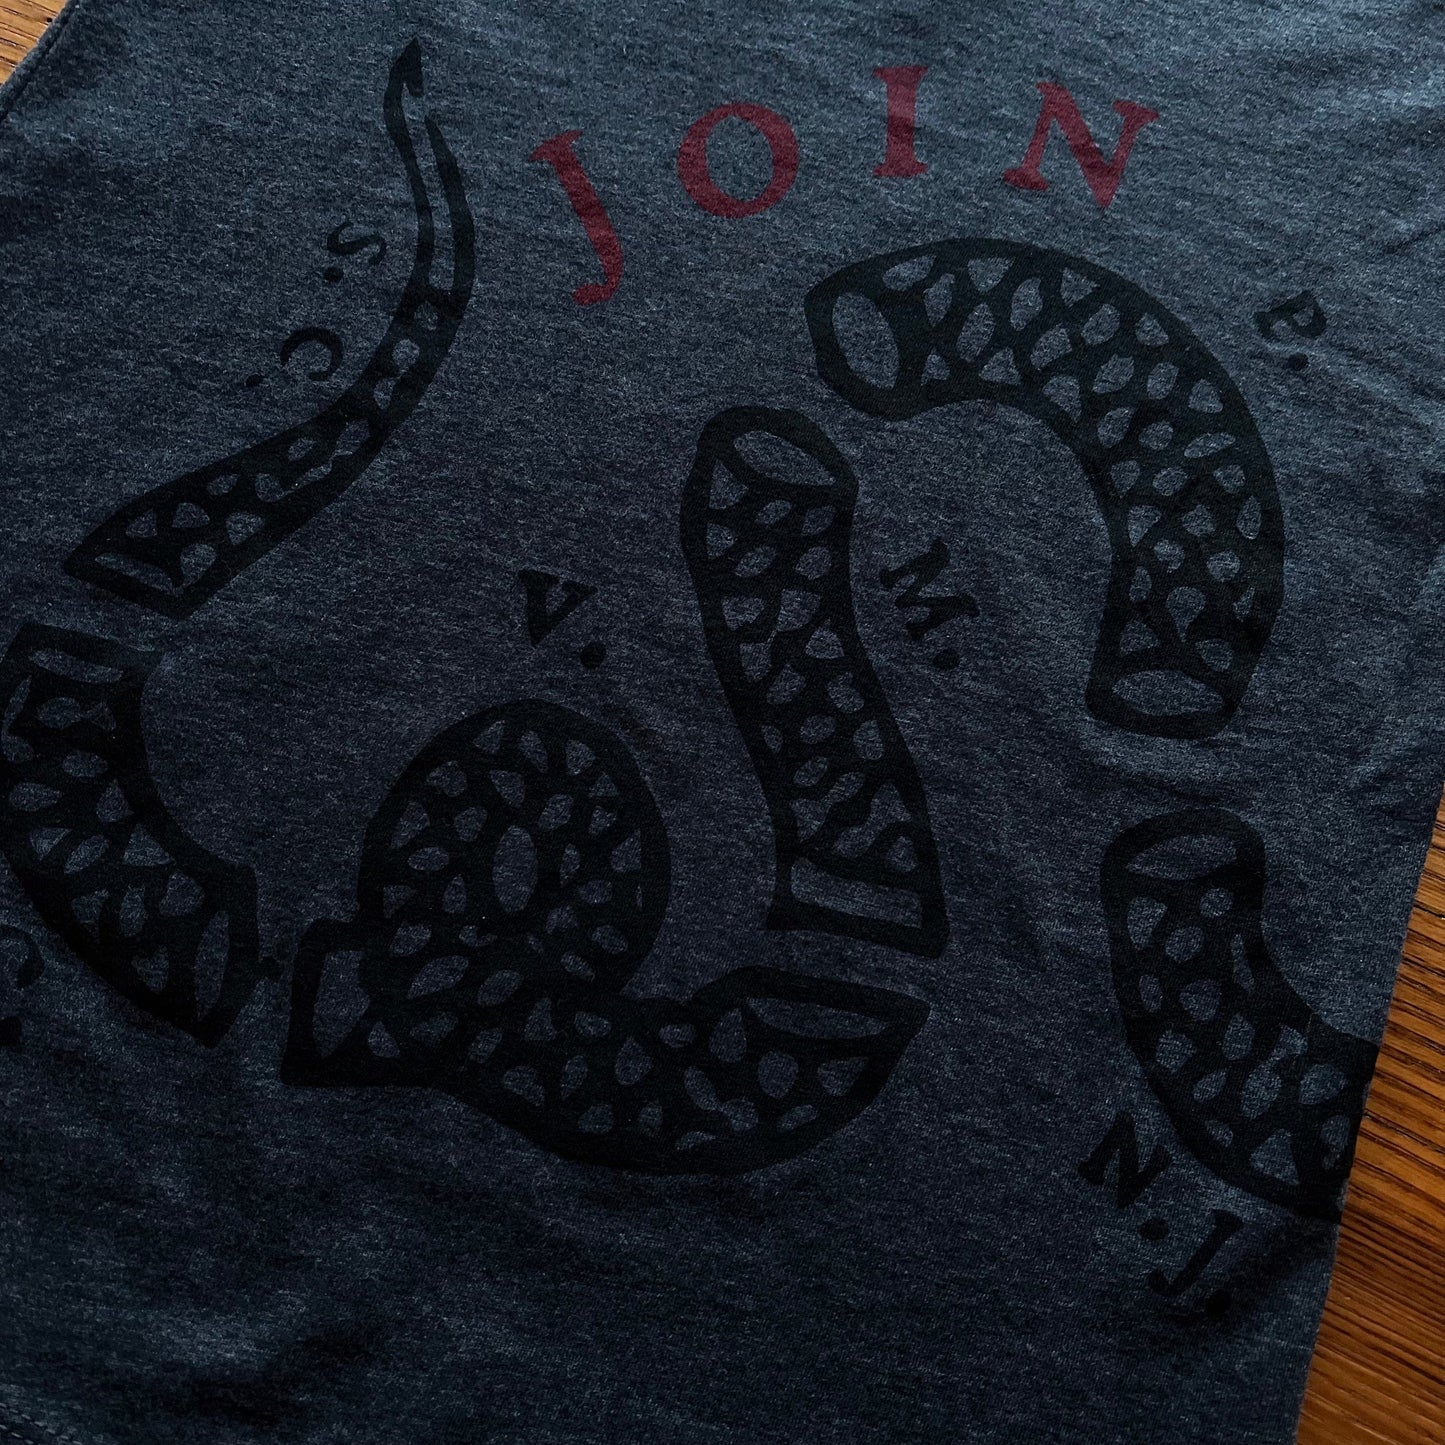 Close-up front of "Join or Die" V-neck shirt - Charcoal grey from the history list store